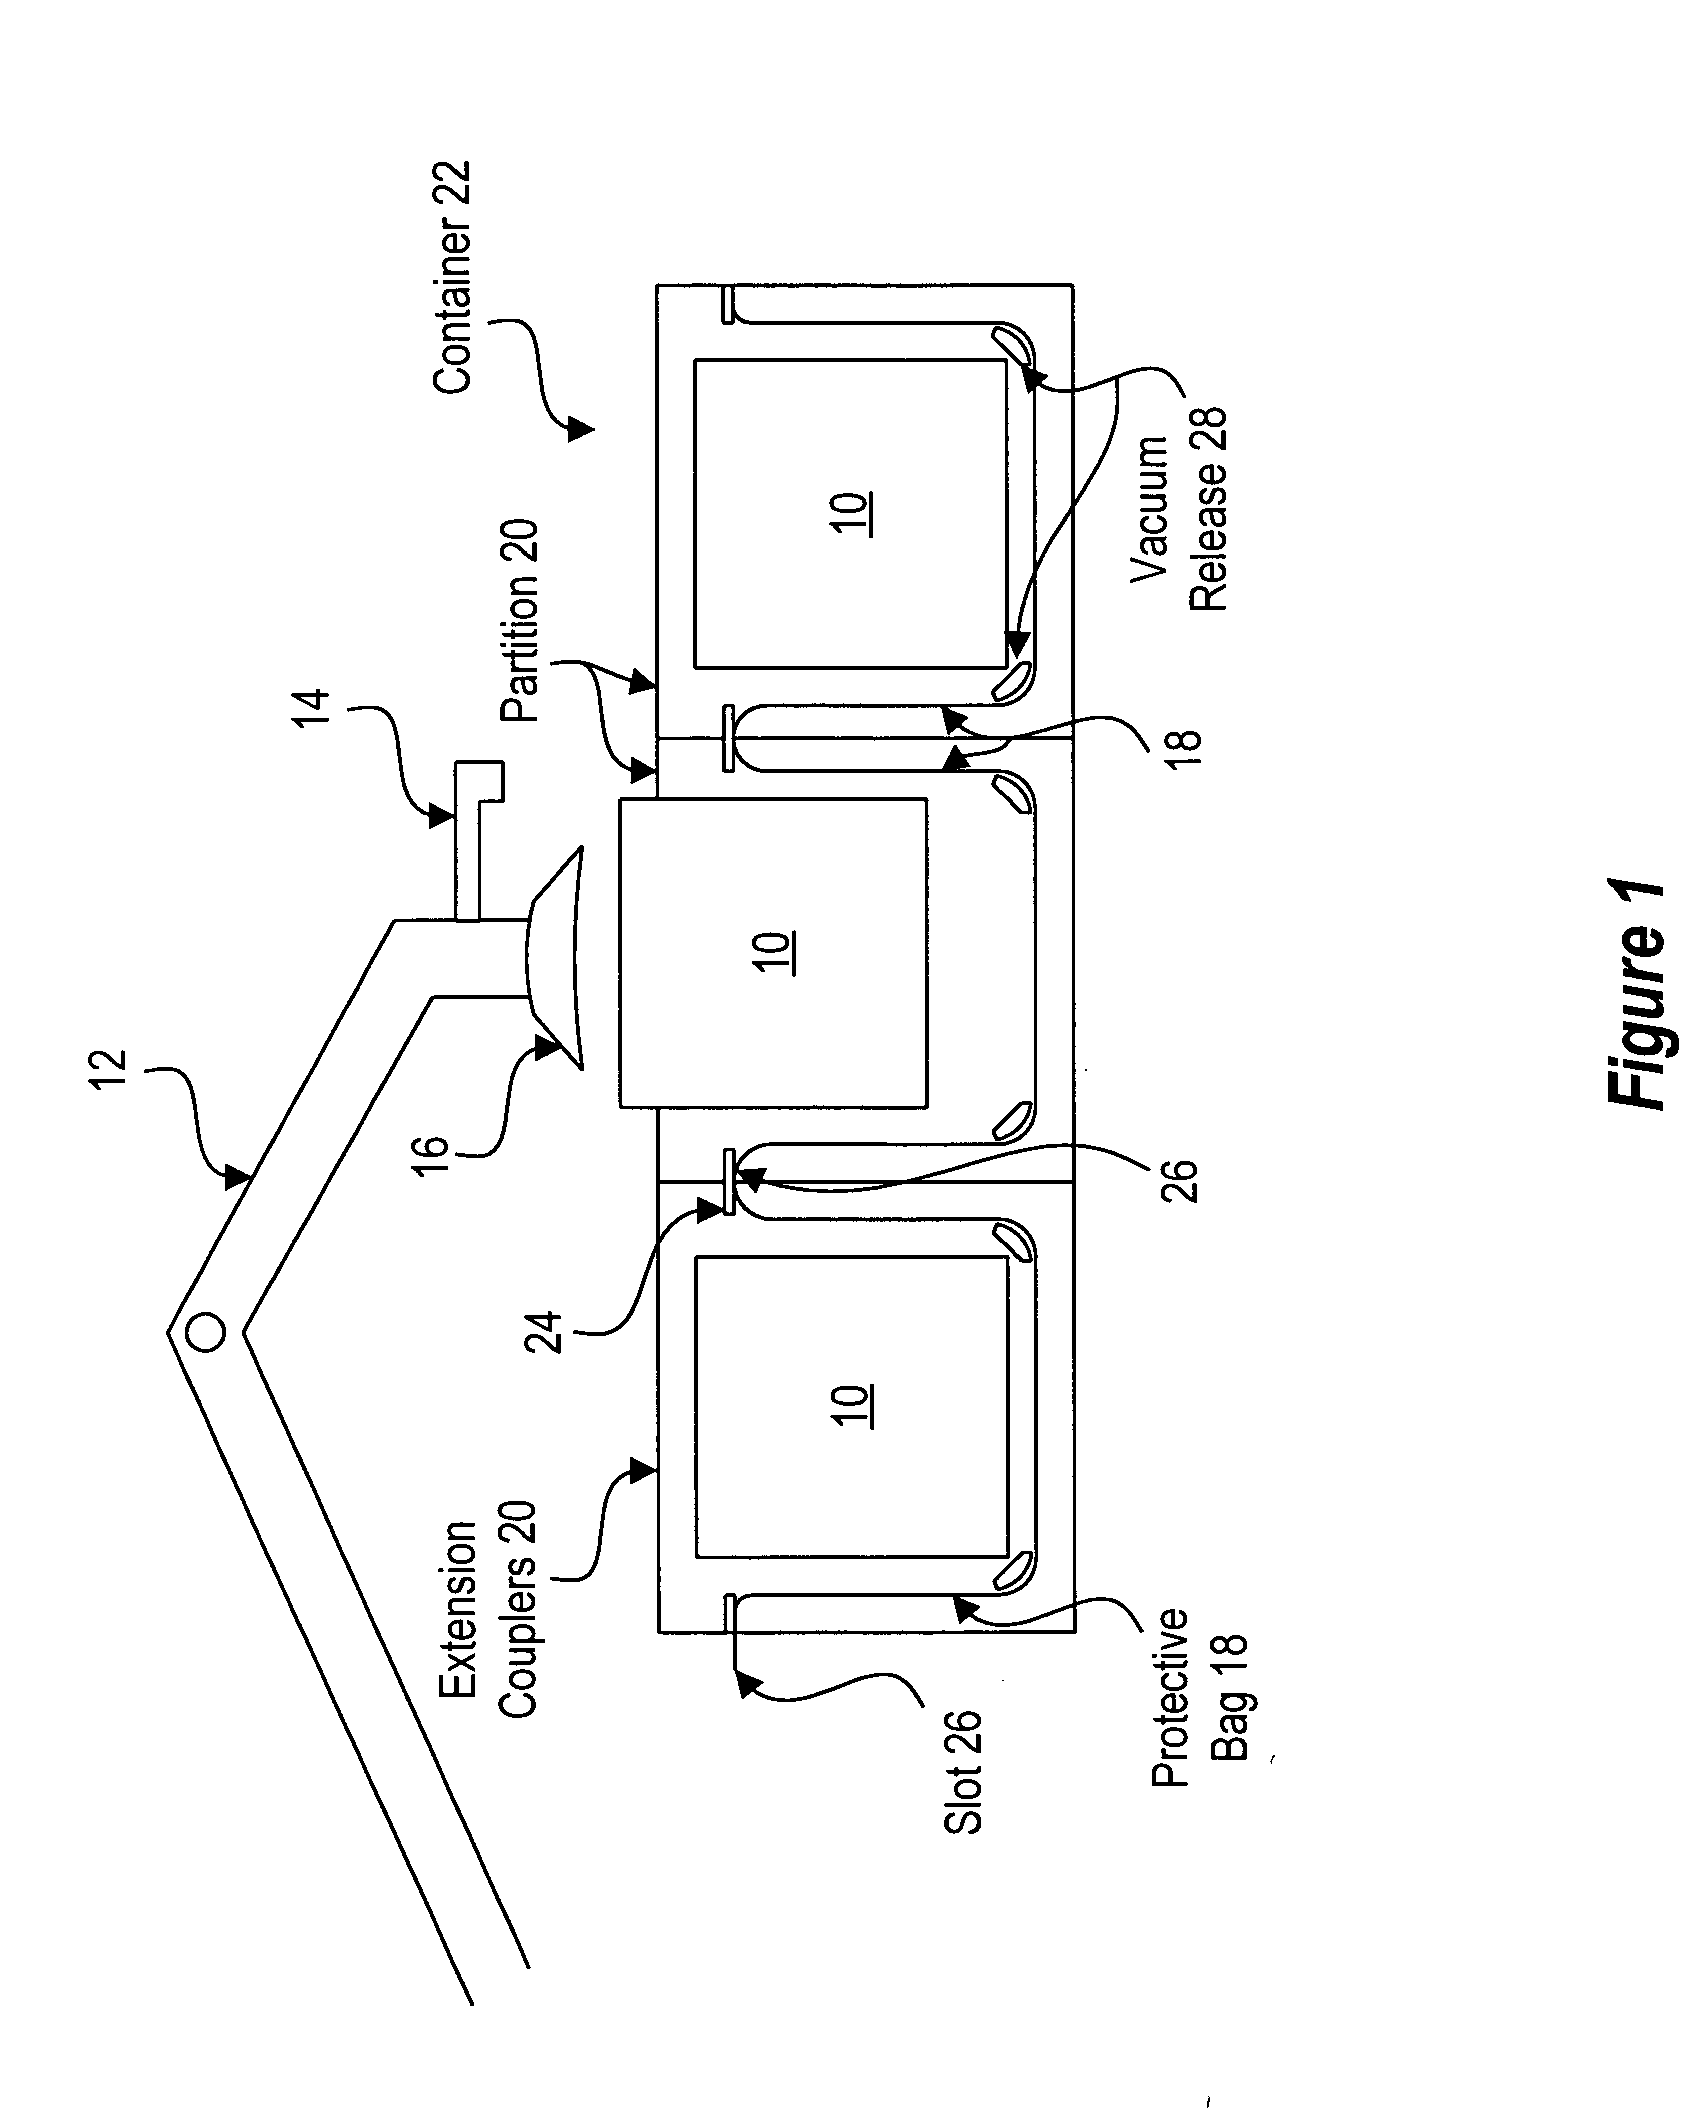 System and method for automated unpacking